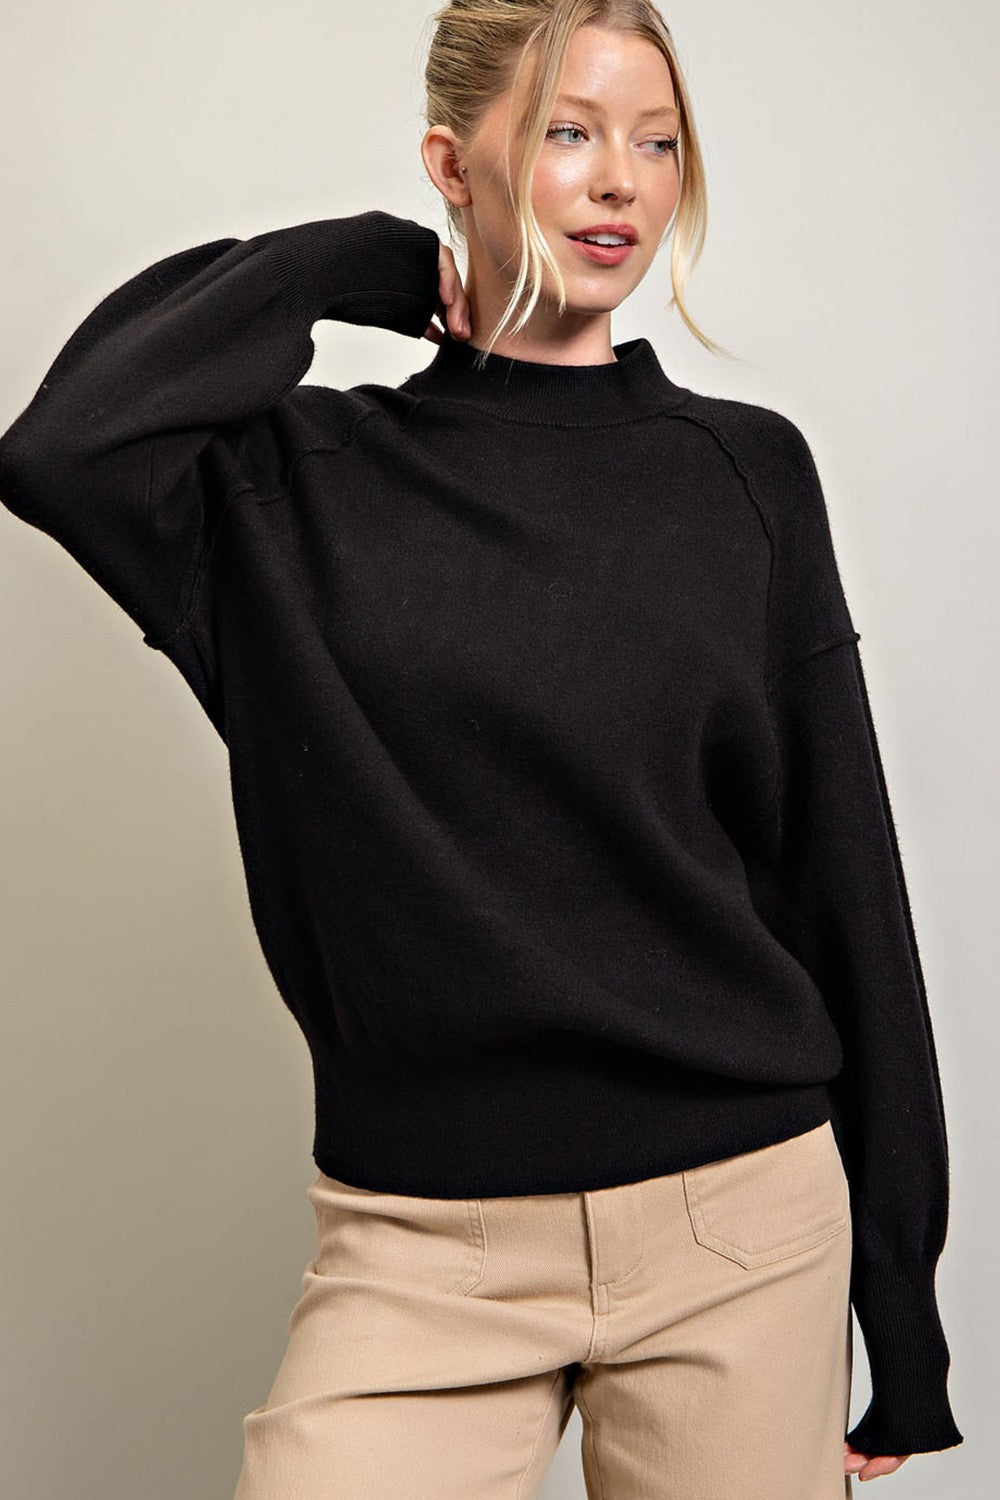 Black Solid long sleeve sweater featuring gauntlet cuffs to create a bubble sleeve effect, added seams for detail, a crew neckline, and a ribbed bottom band and neck.